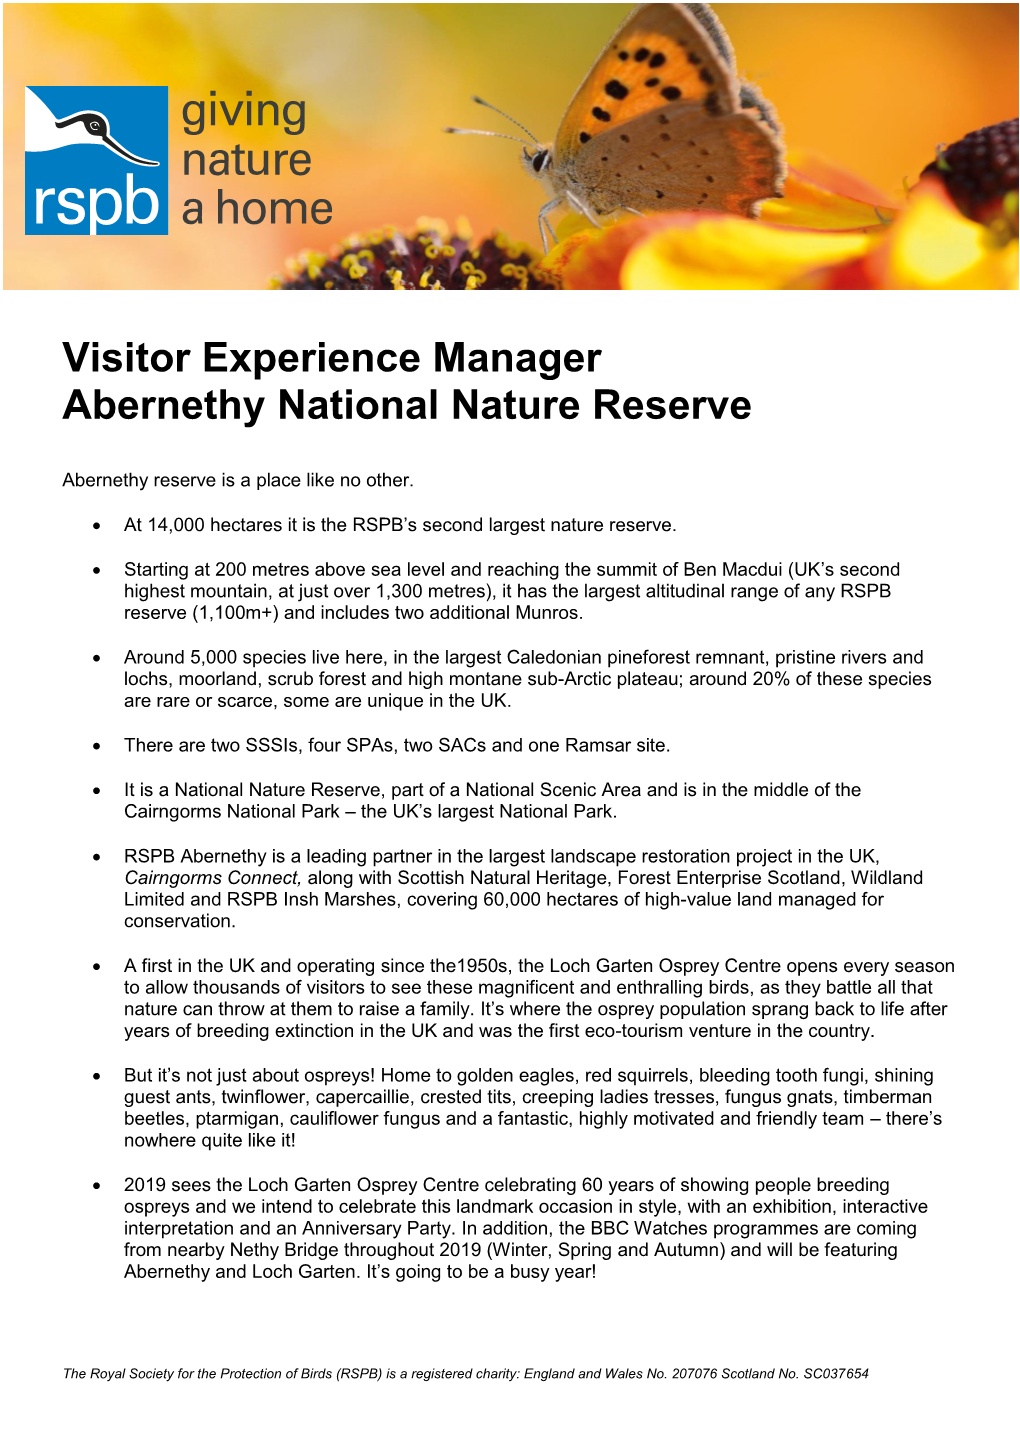 Visitor Experience Manager Abernethy National Nature Reserve